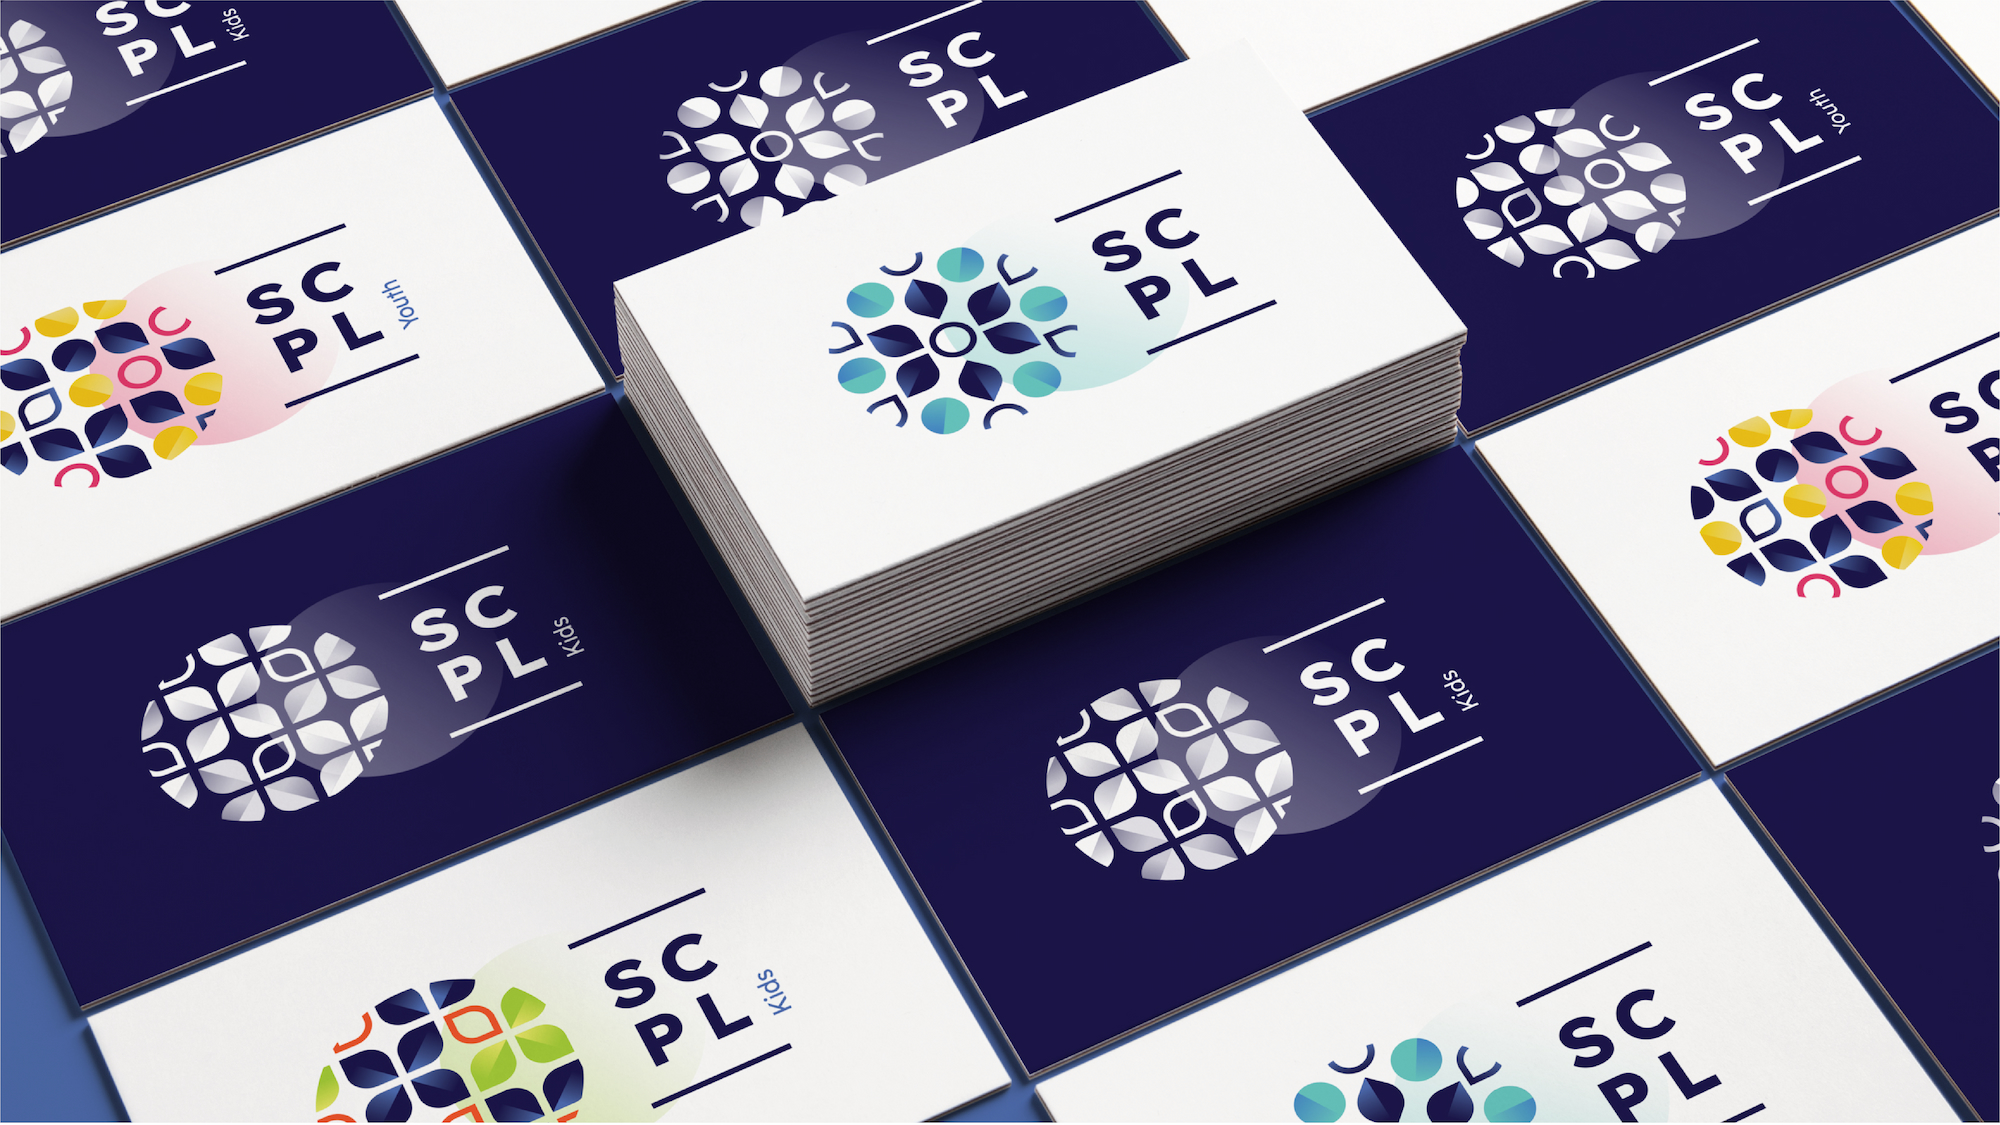 SCPL branded business cards